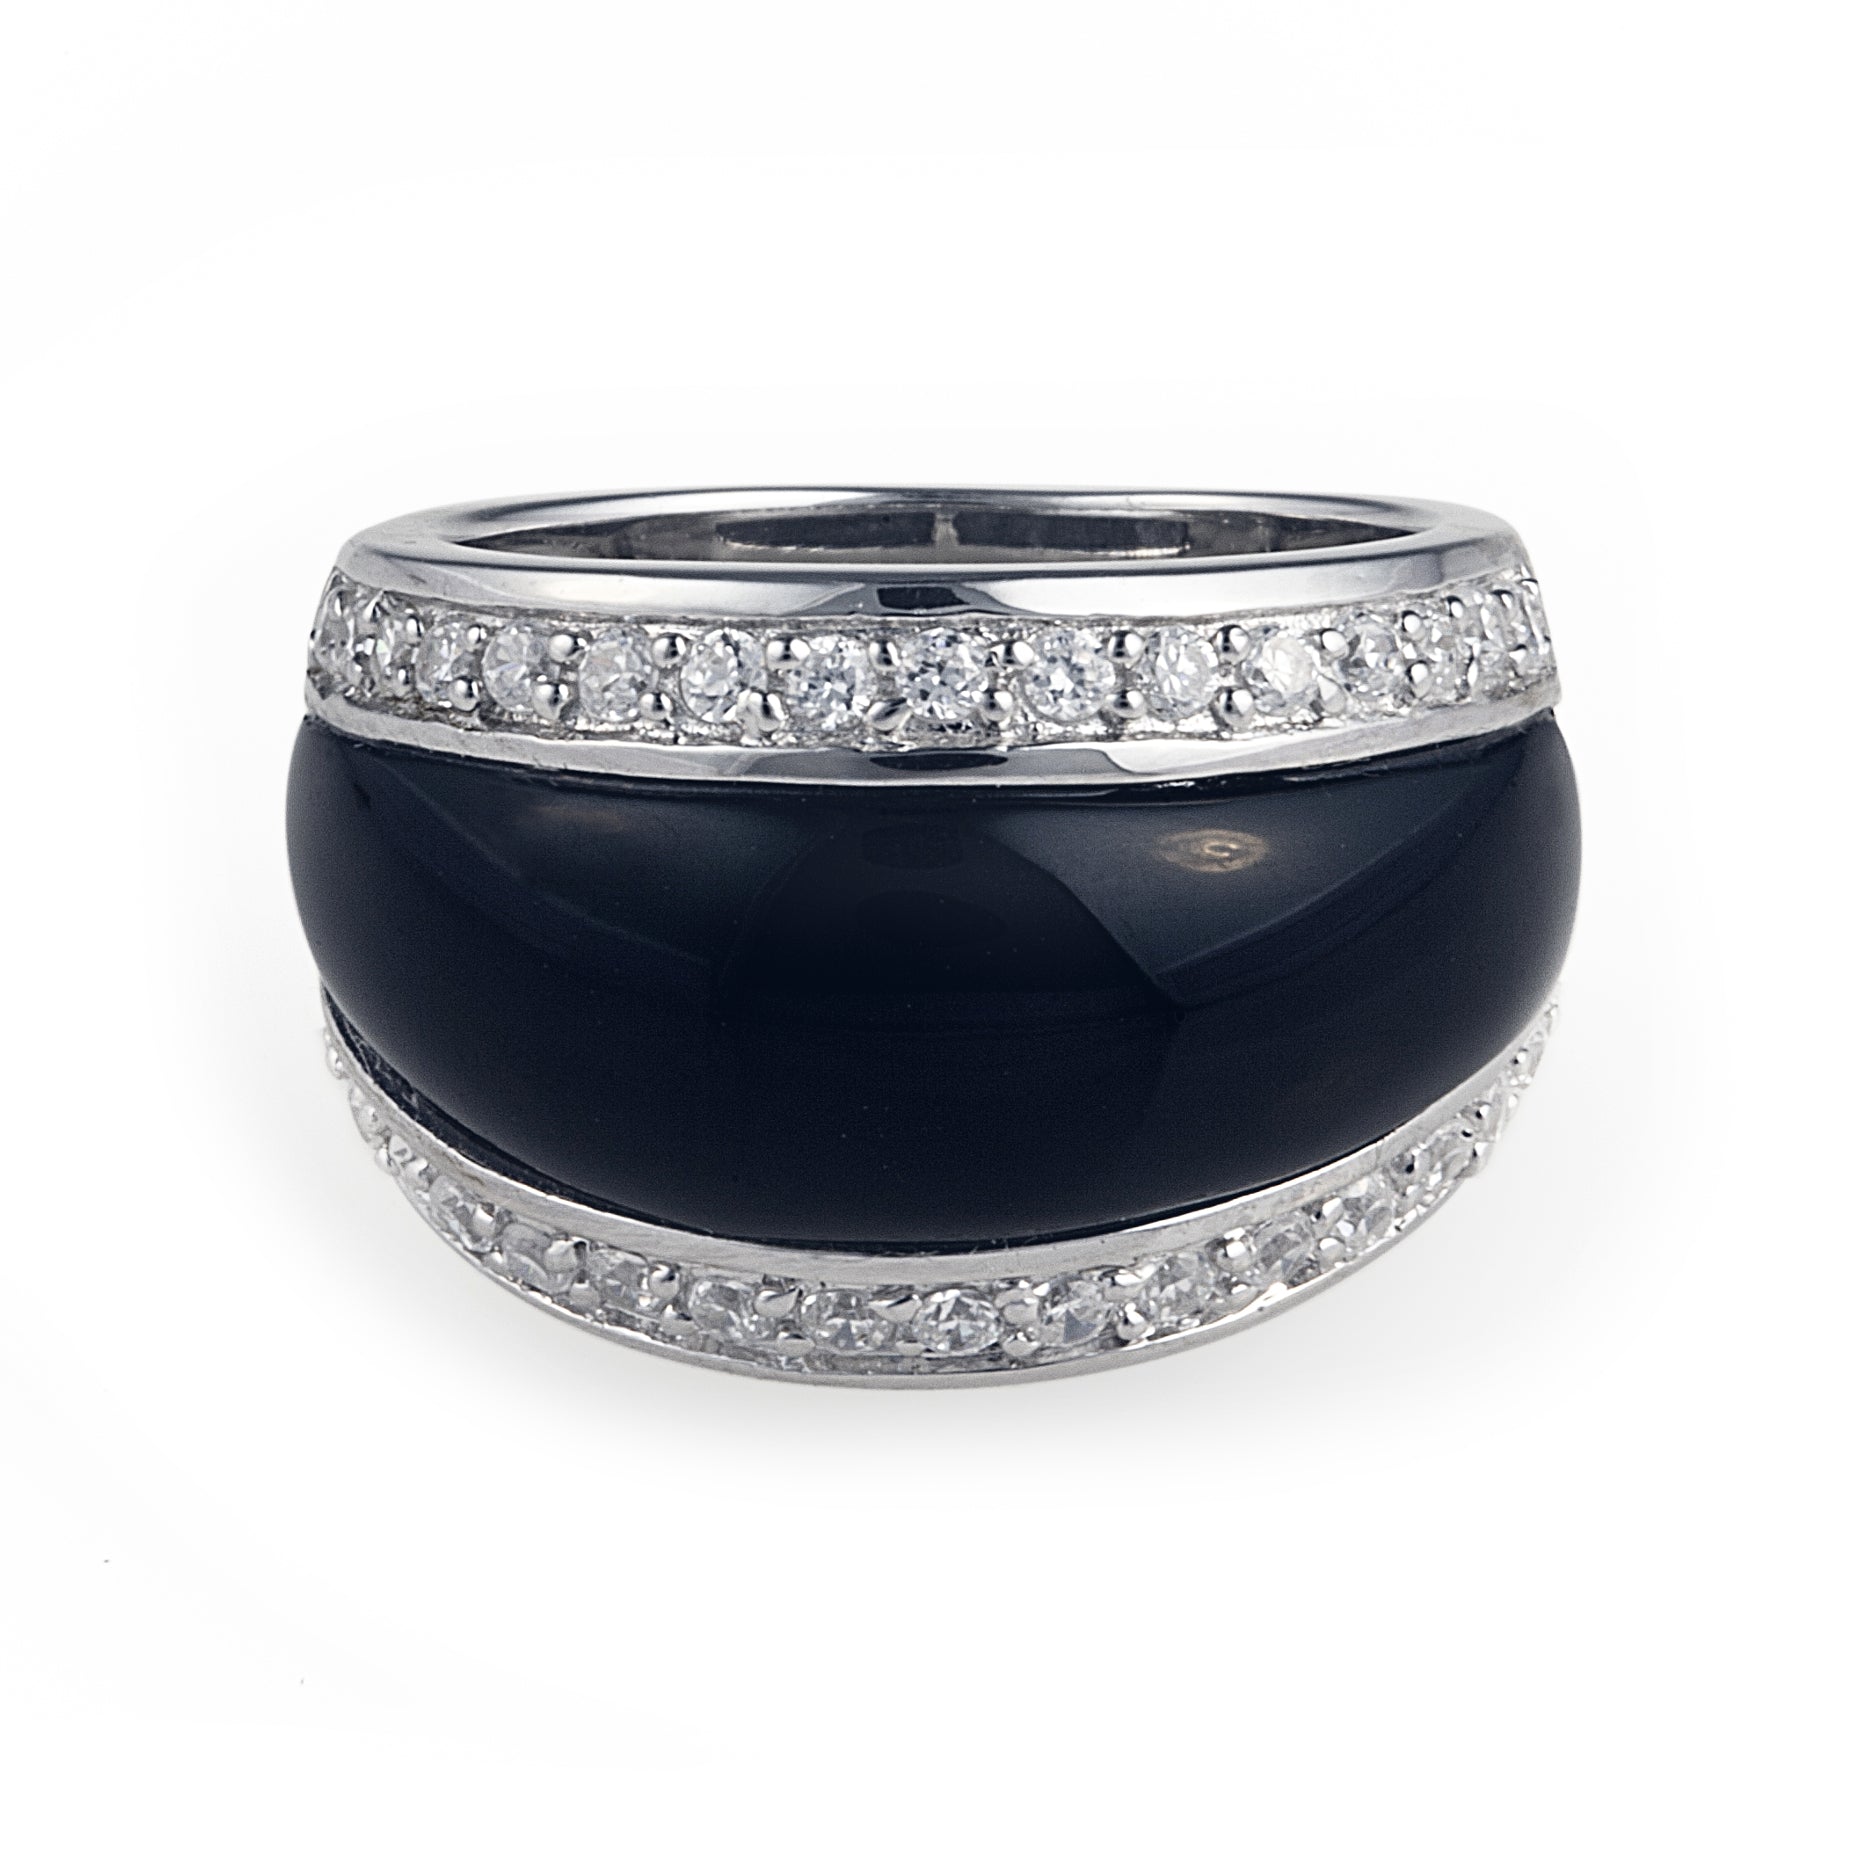 The Onyx Eye Ring is a lovely 925 sterling silver ring featuring a tapered polished black onyx surrounded by cubic zirconia stones. Shop rings and luxury jewellery at affordable prices by Bellagio & Co. Designed in Australia. Worldwide Shipping.